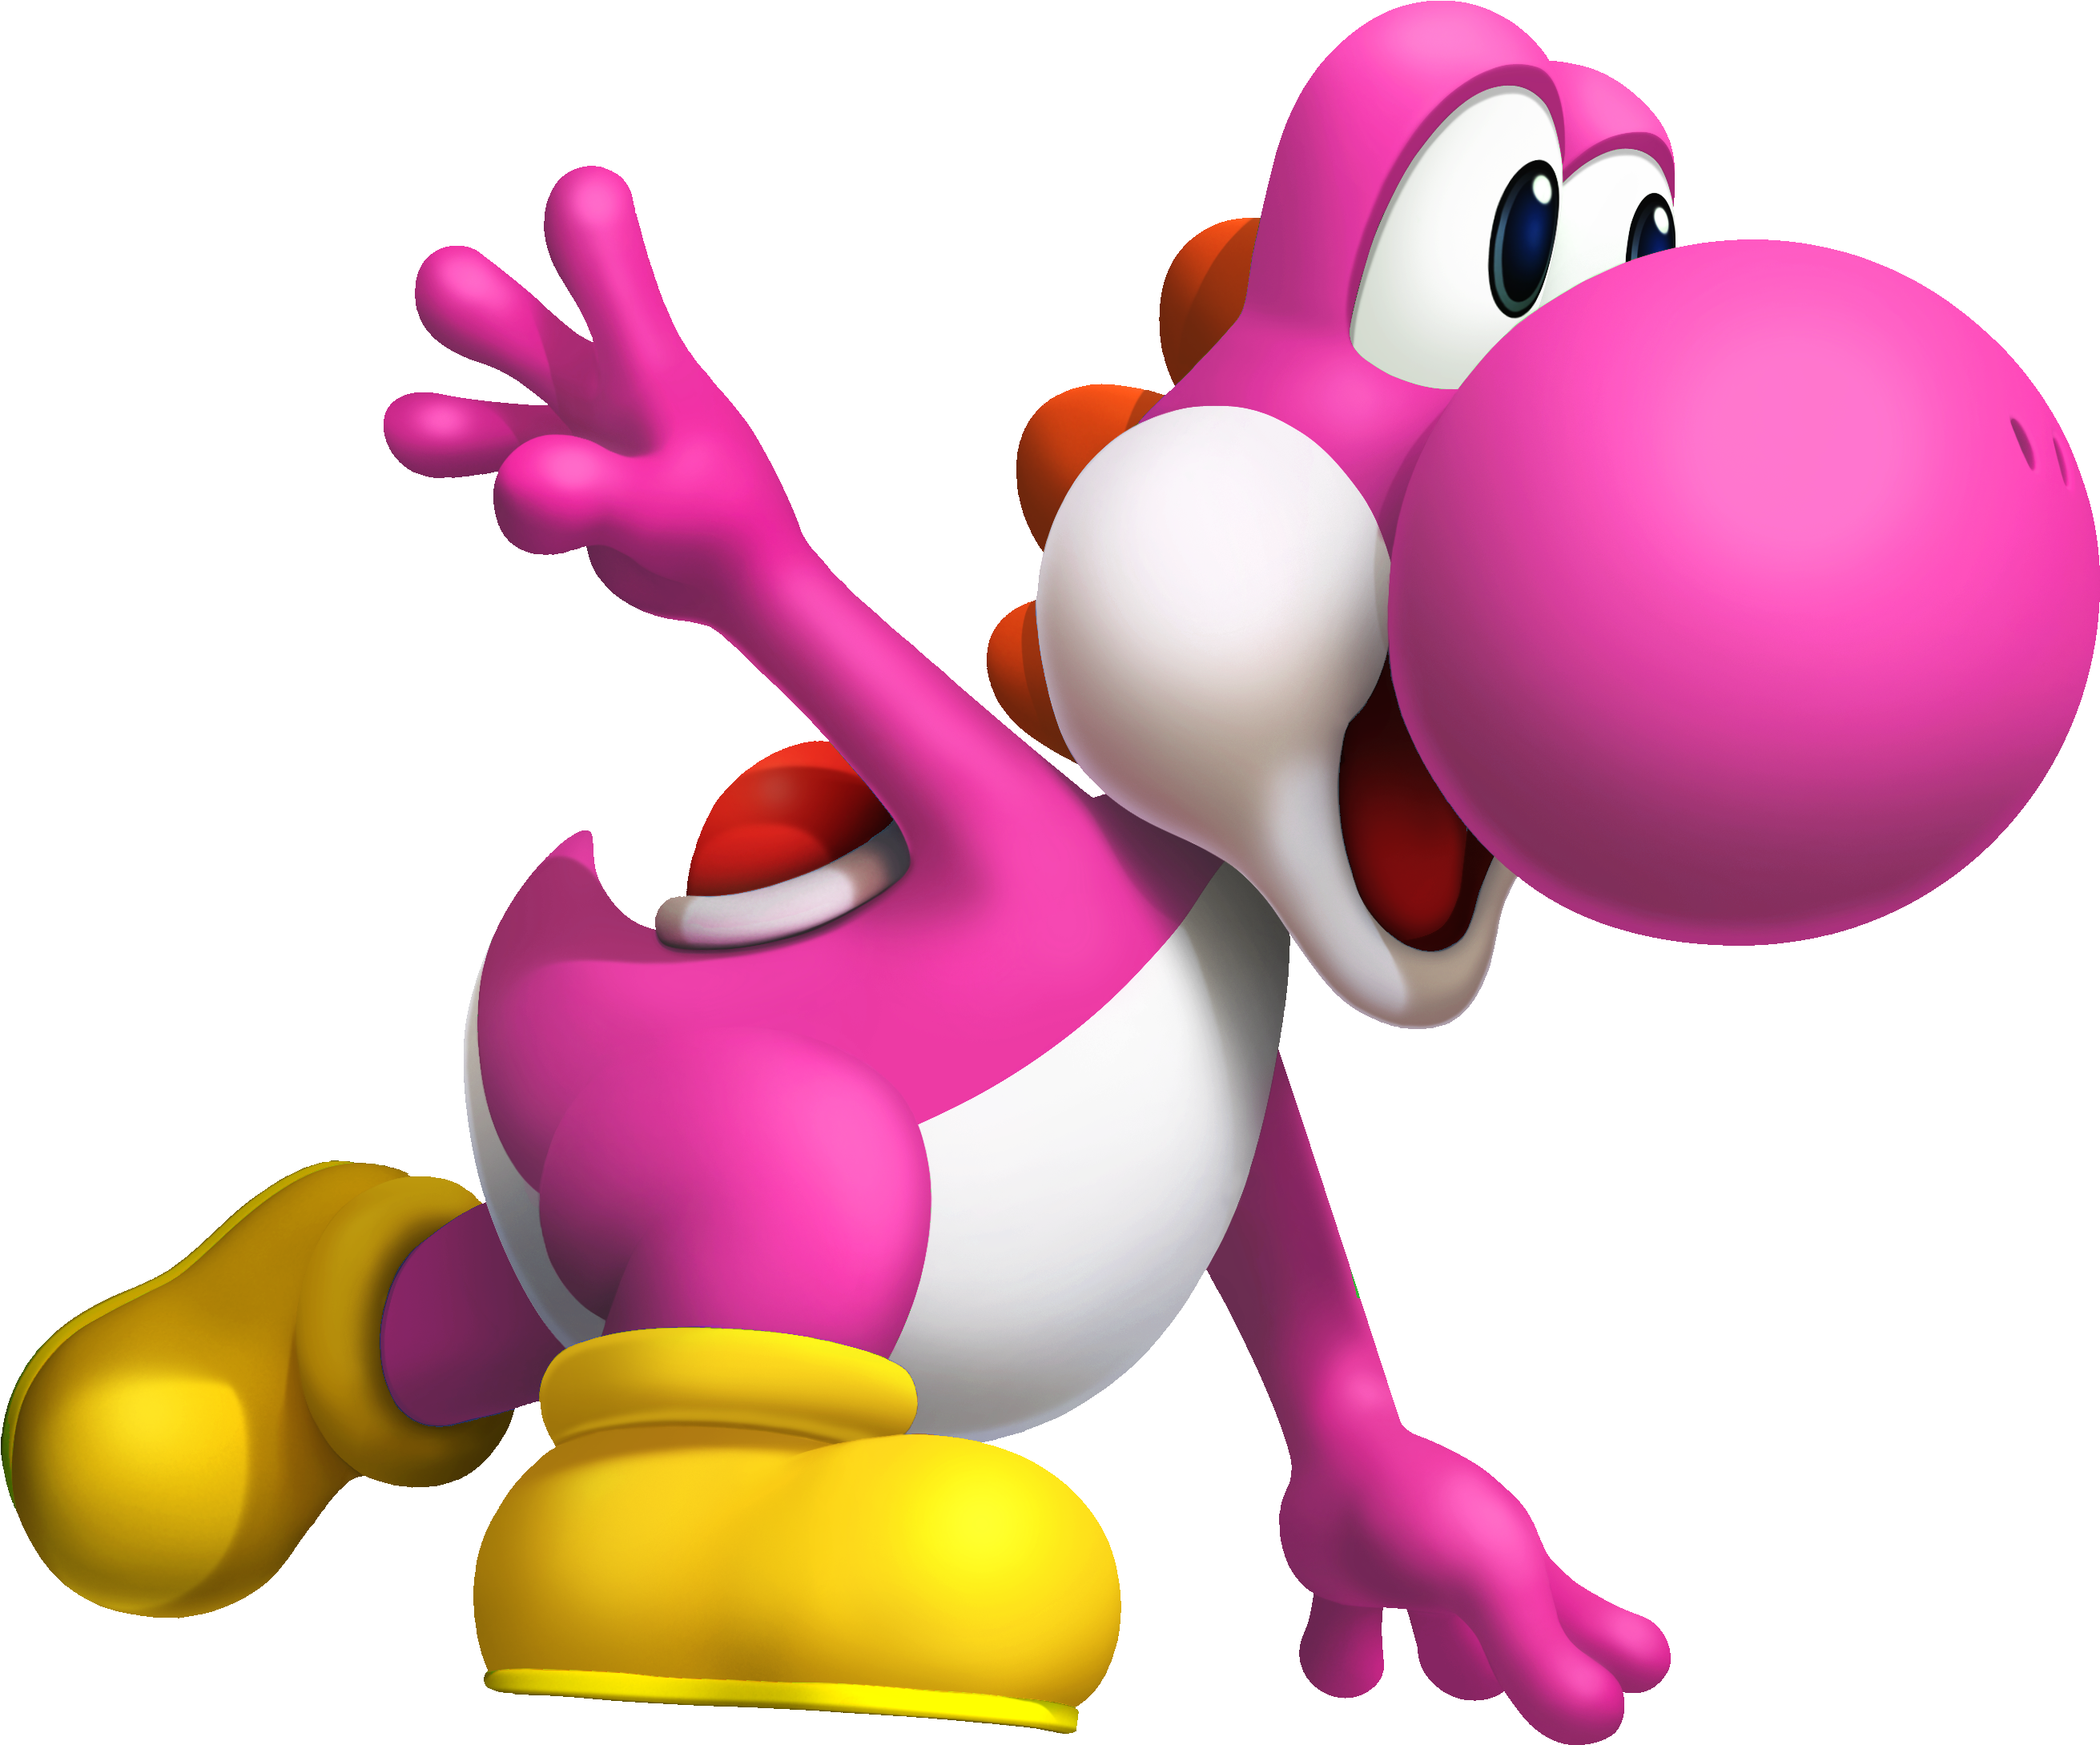 Pink Yoshi - Mario And Sonic At The Olympic Winter Games Yoshi (2662x2246)